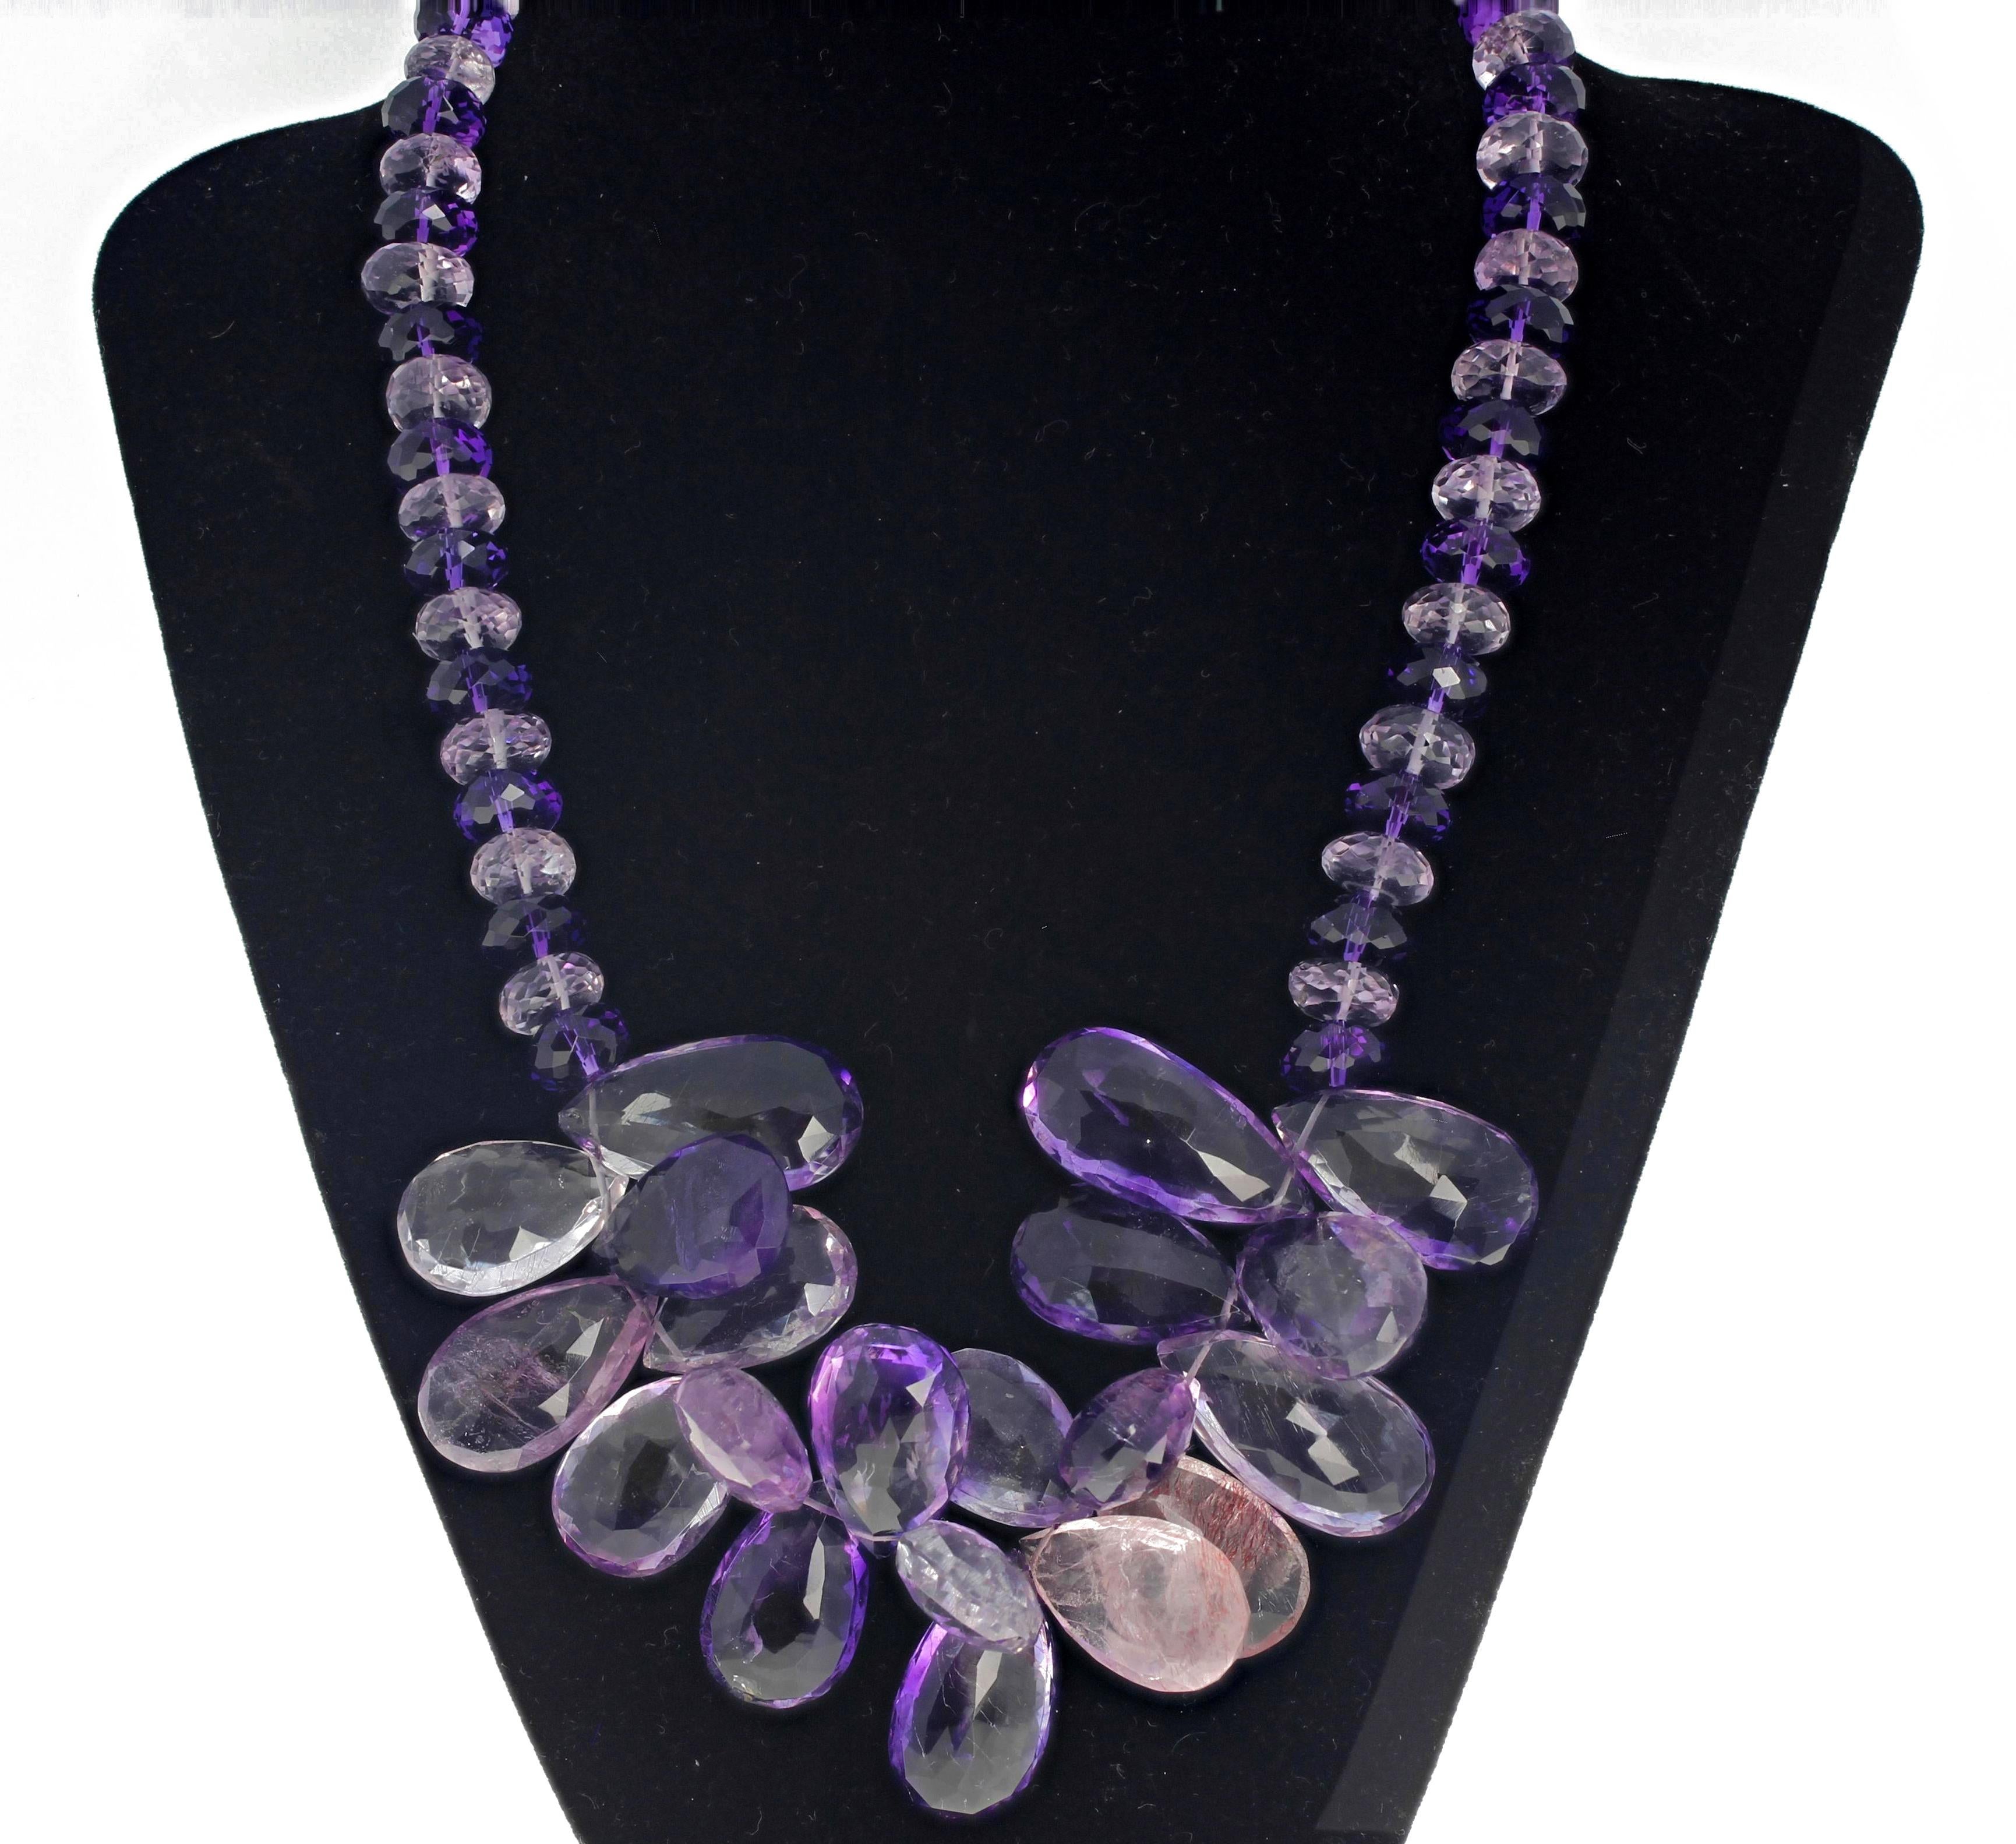 Gemjunky BoHo Chic Glittering Amethysts Mixed And Matched Impressive Necklace 1